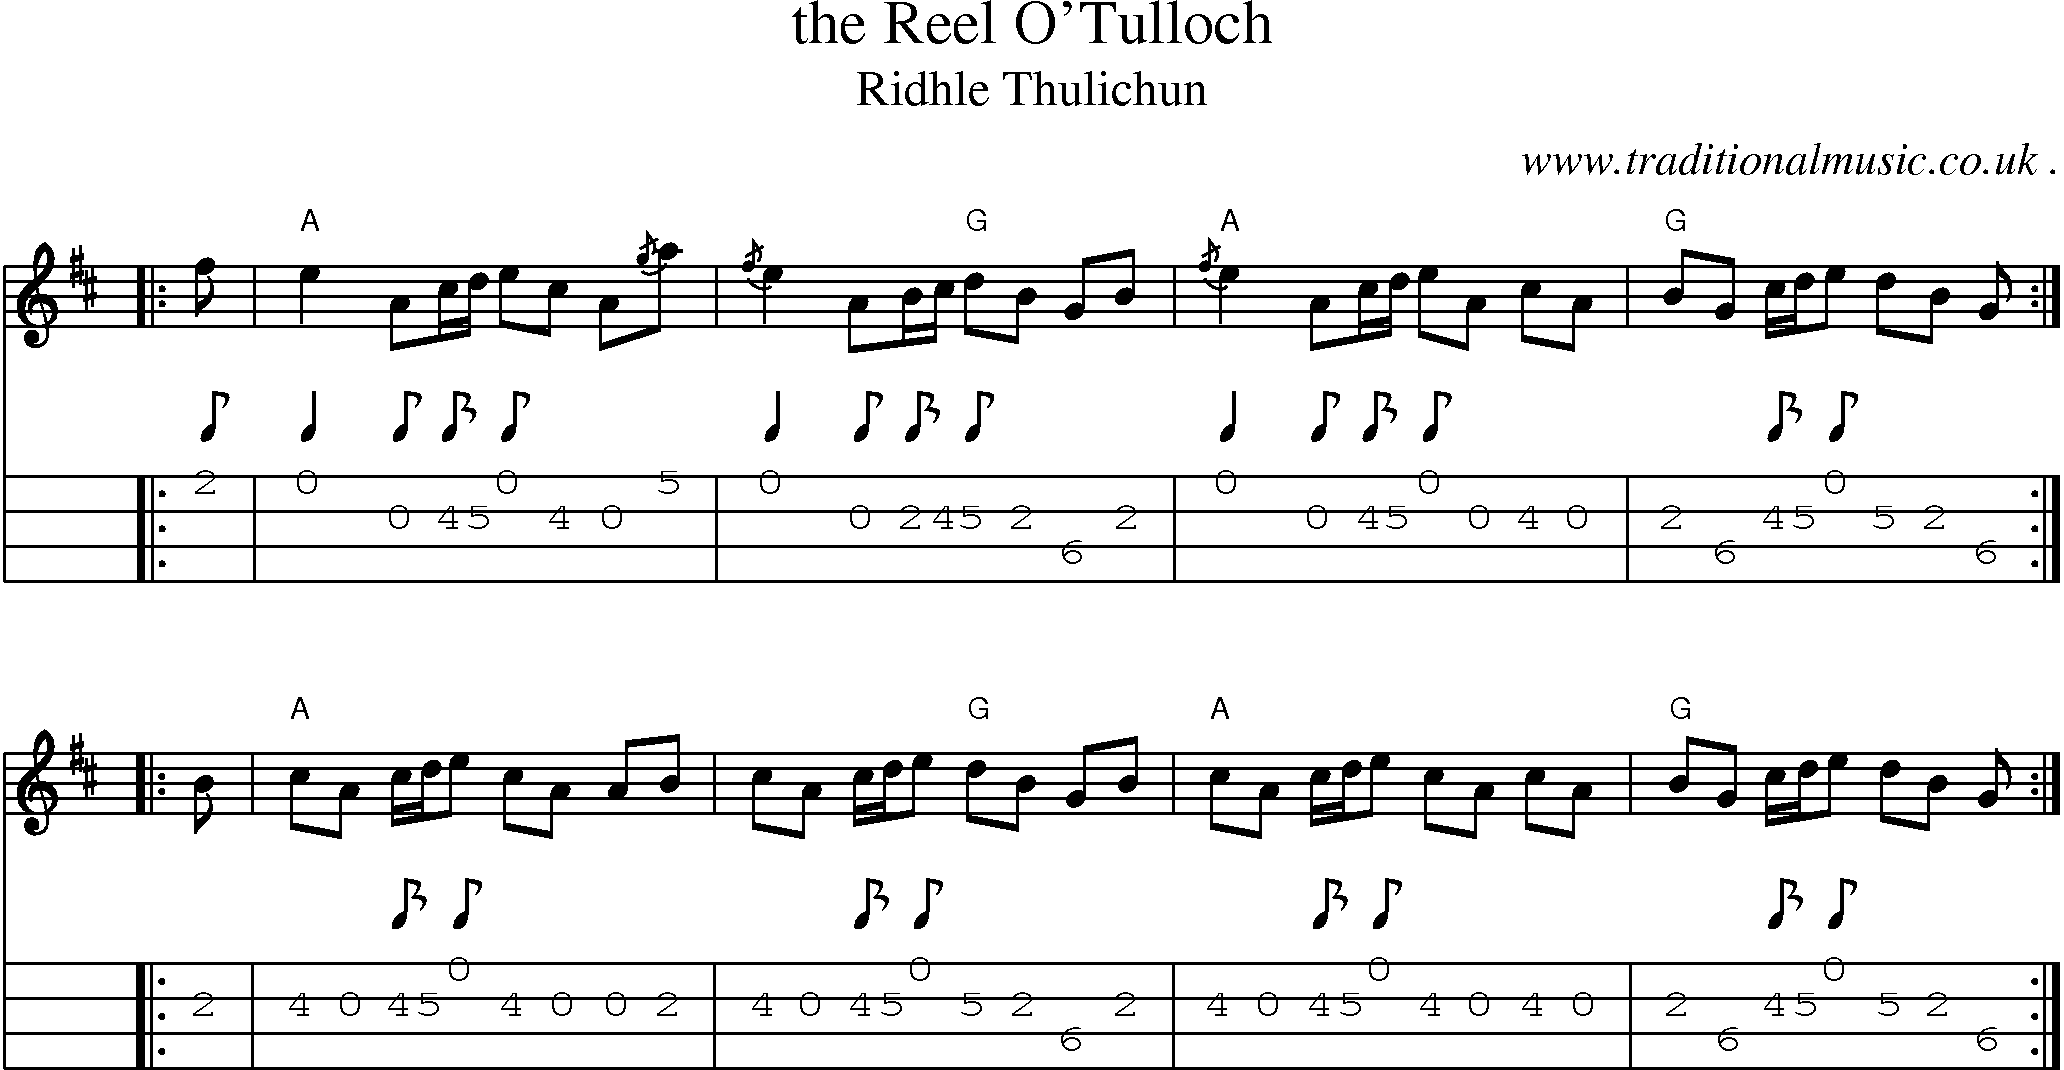 Sheet-music  score, Chords and Mandolin Tabs for The Reel Otulloch